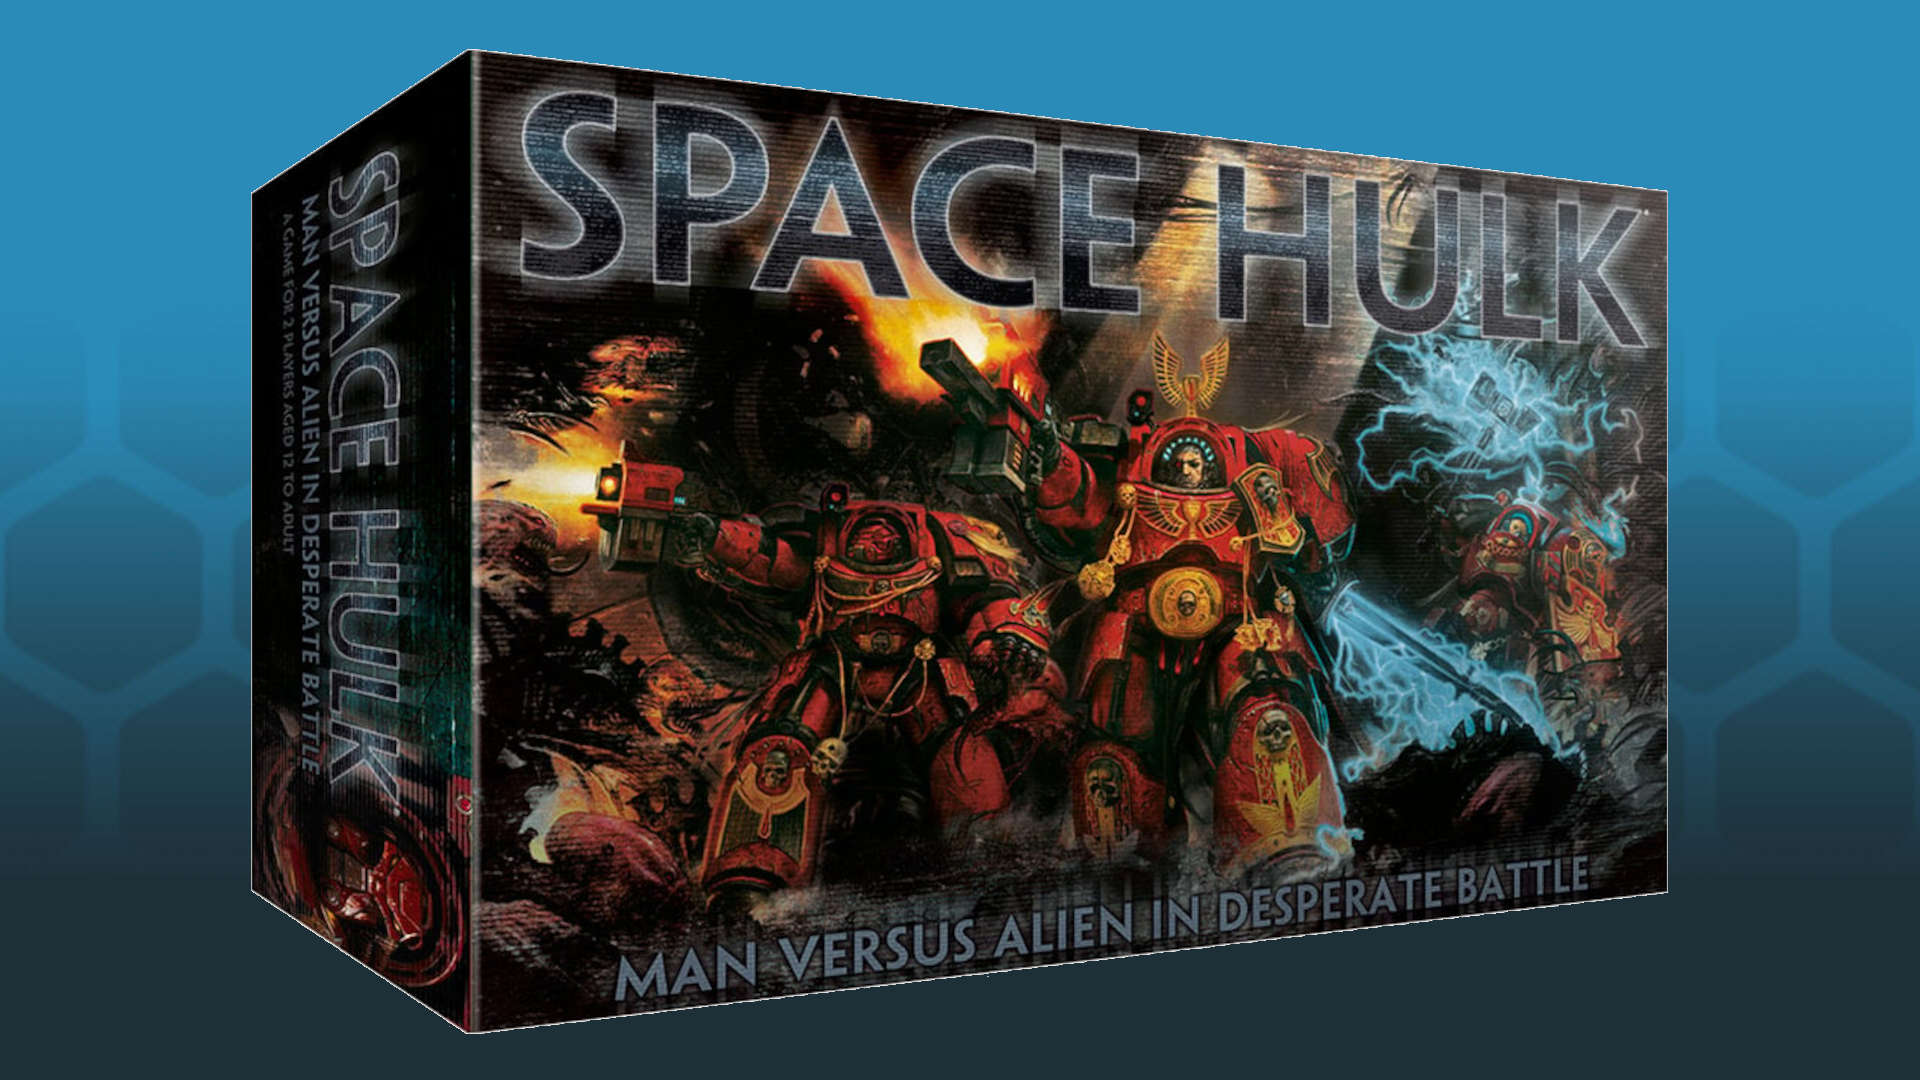 Warhammer 40k Space Hulk teaser from GW - box art mock up of the Space Hulk board game by Games Workshop